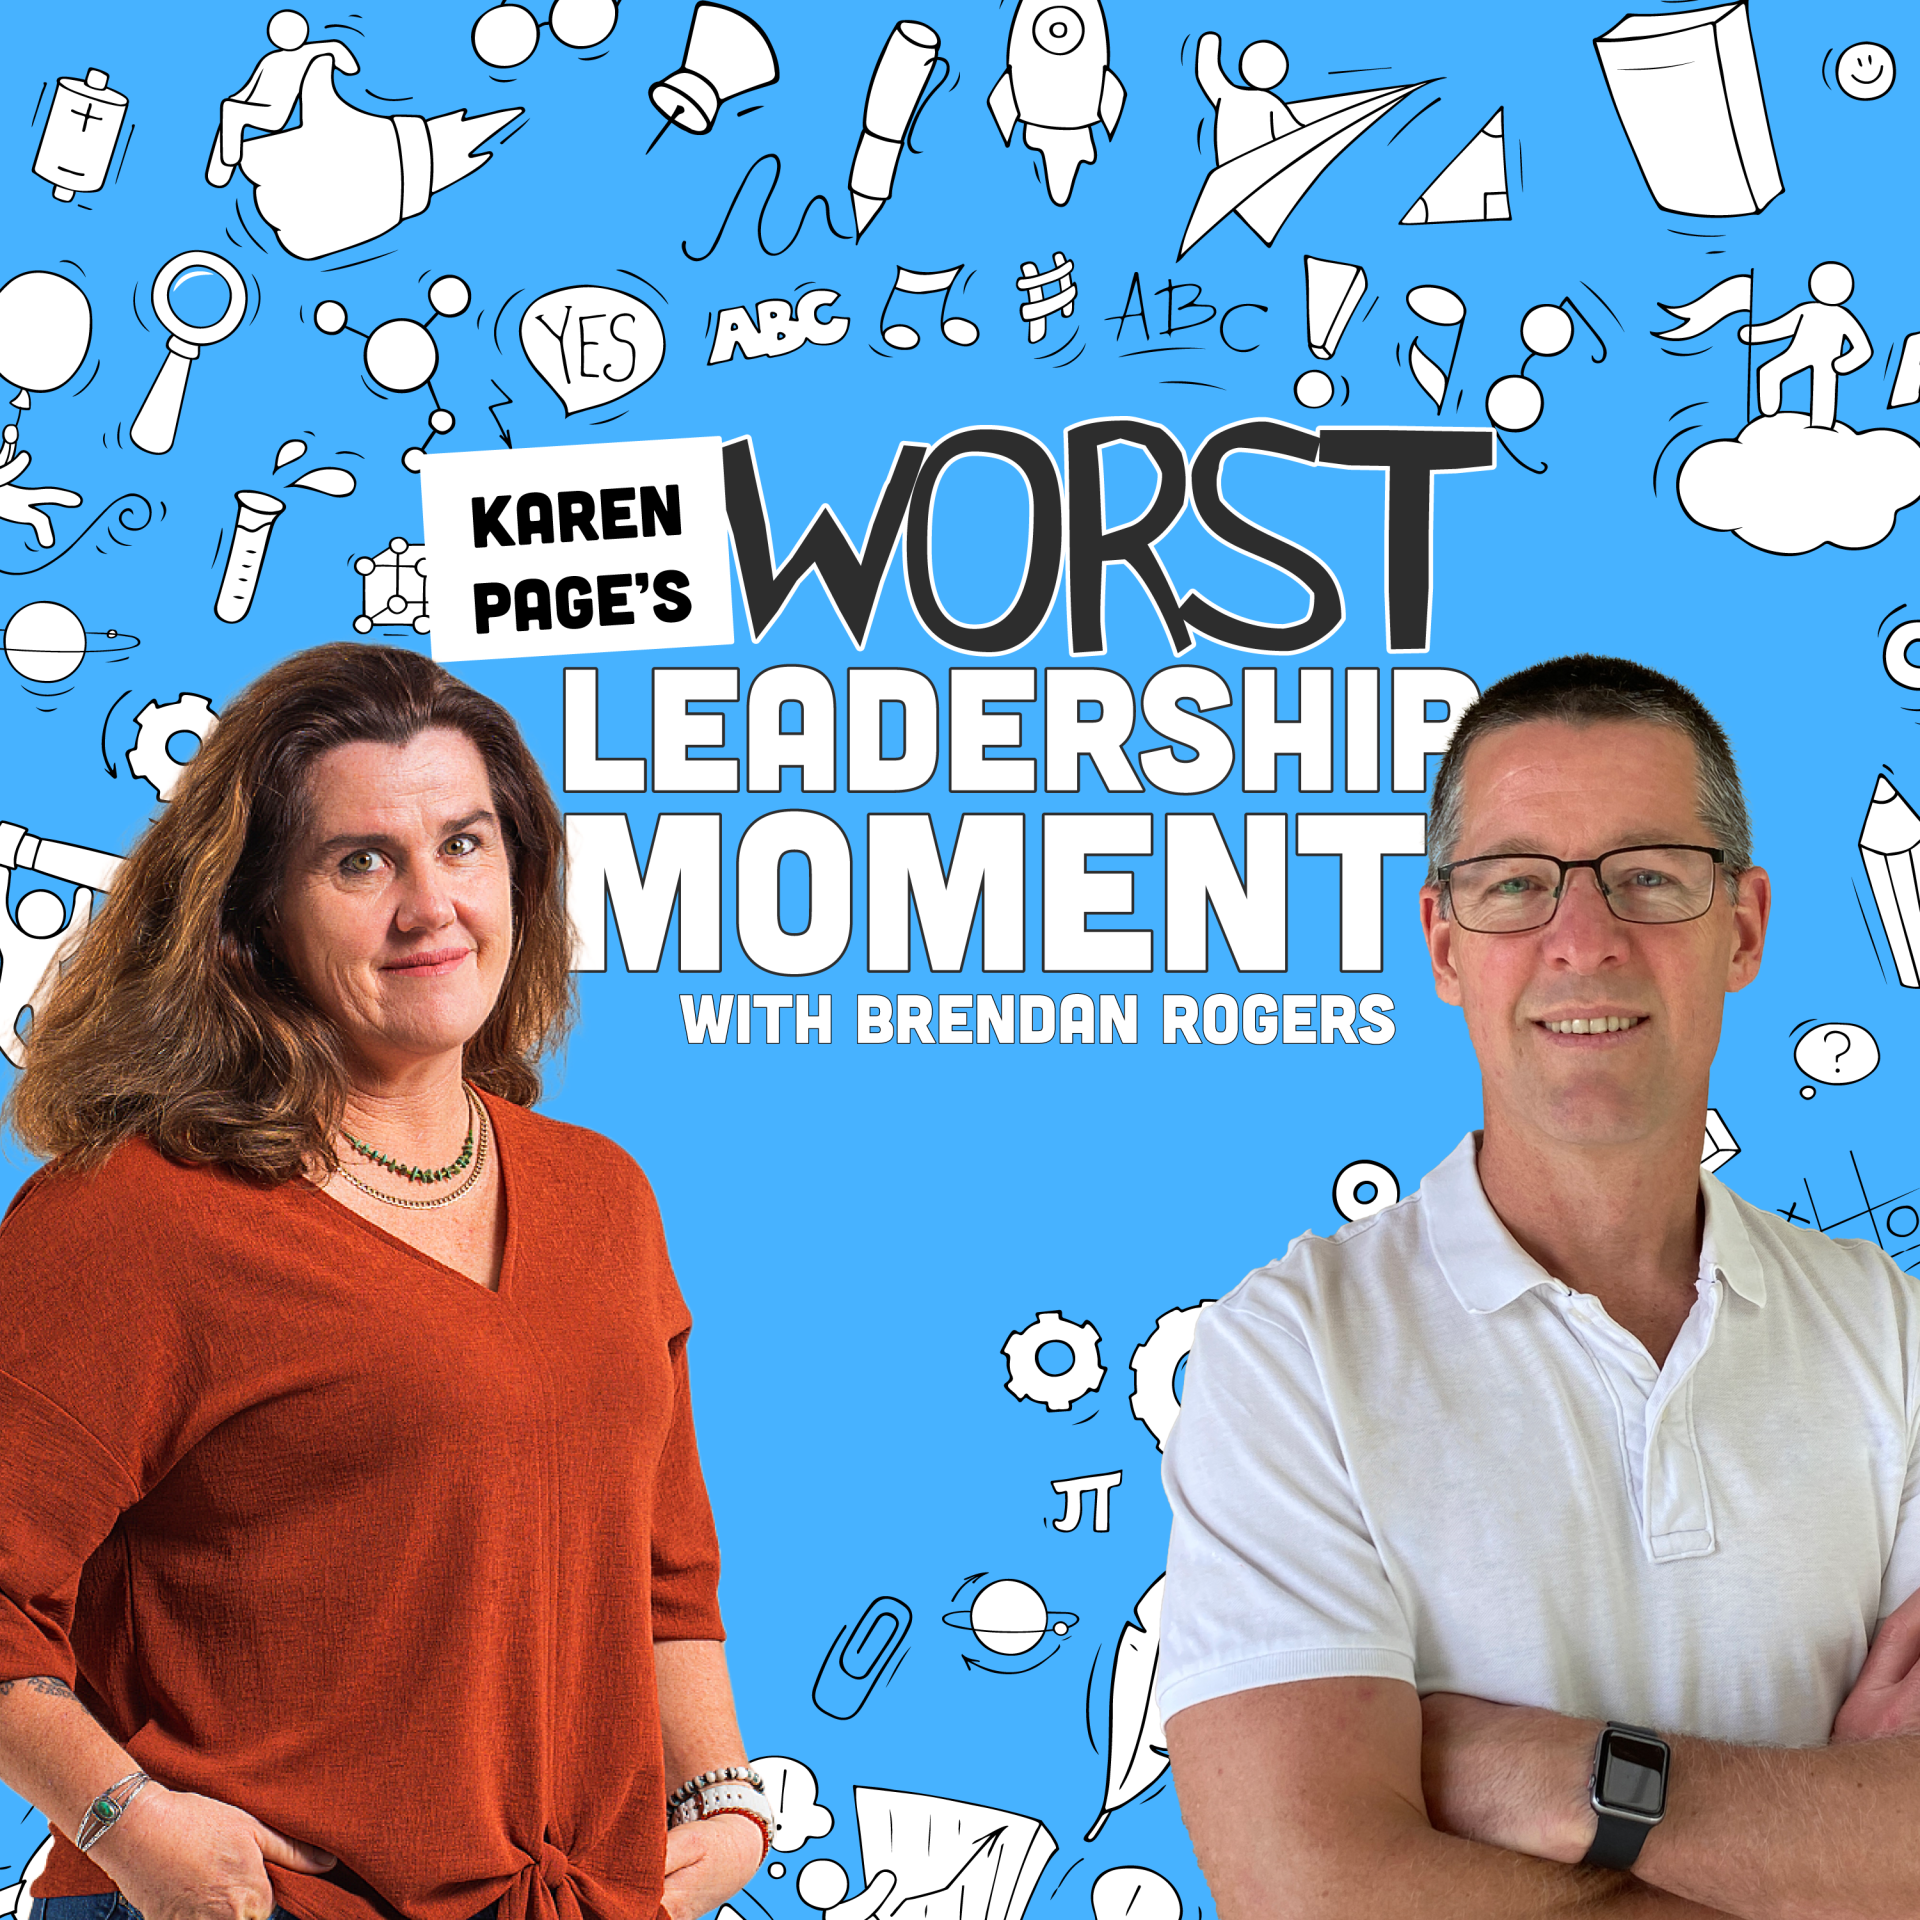 My Worst Leadership Moment with Karen Page